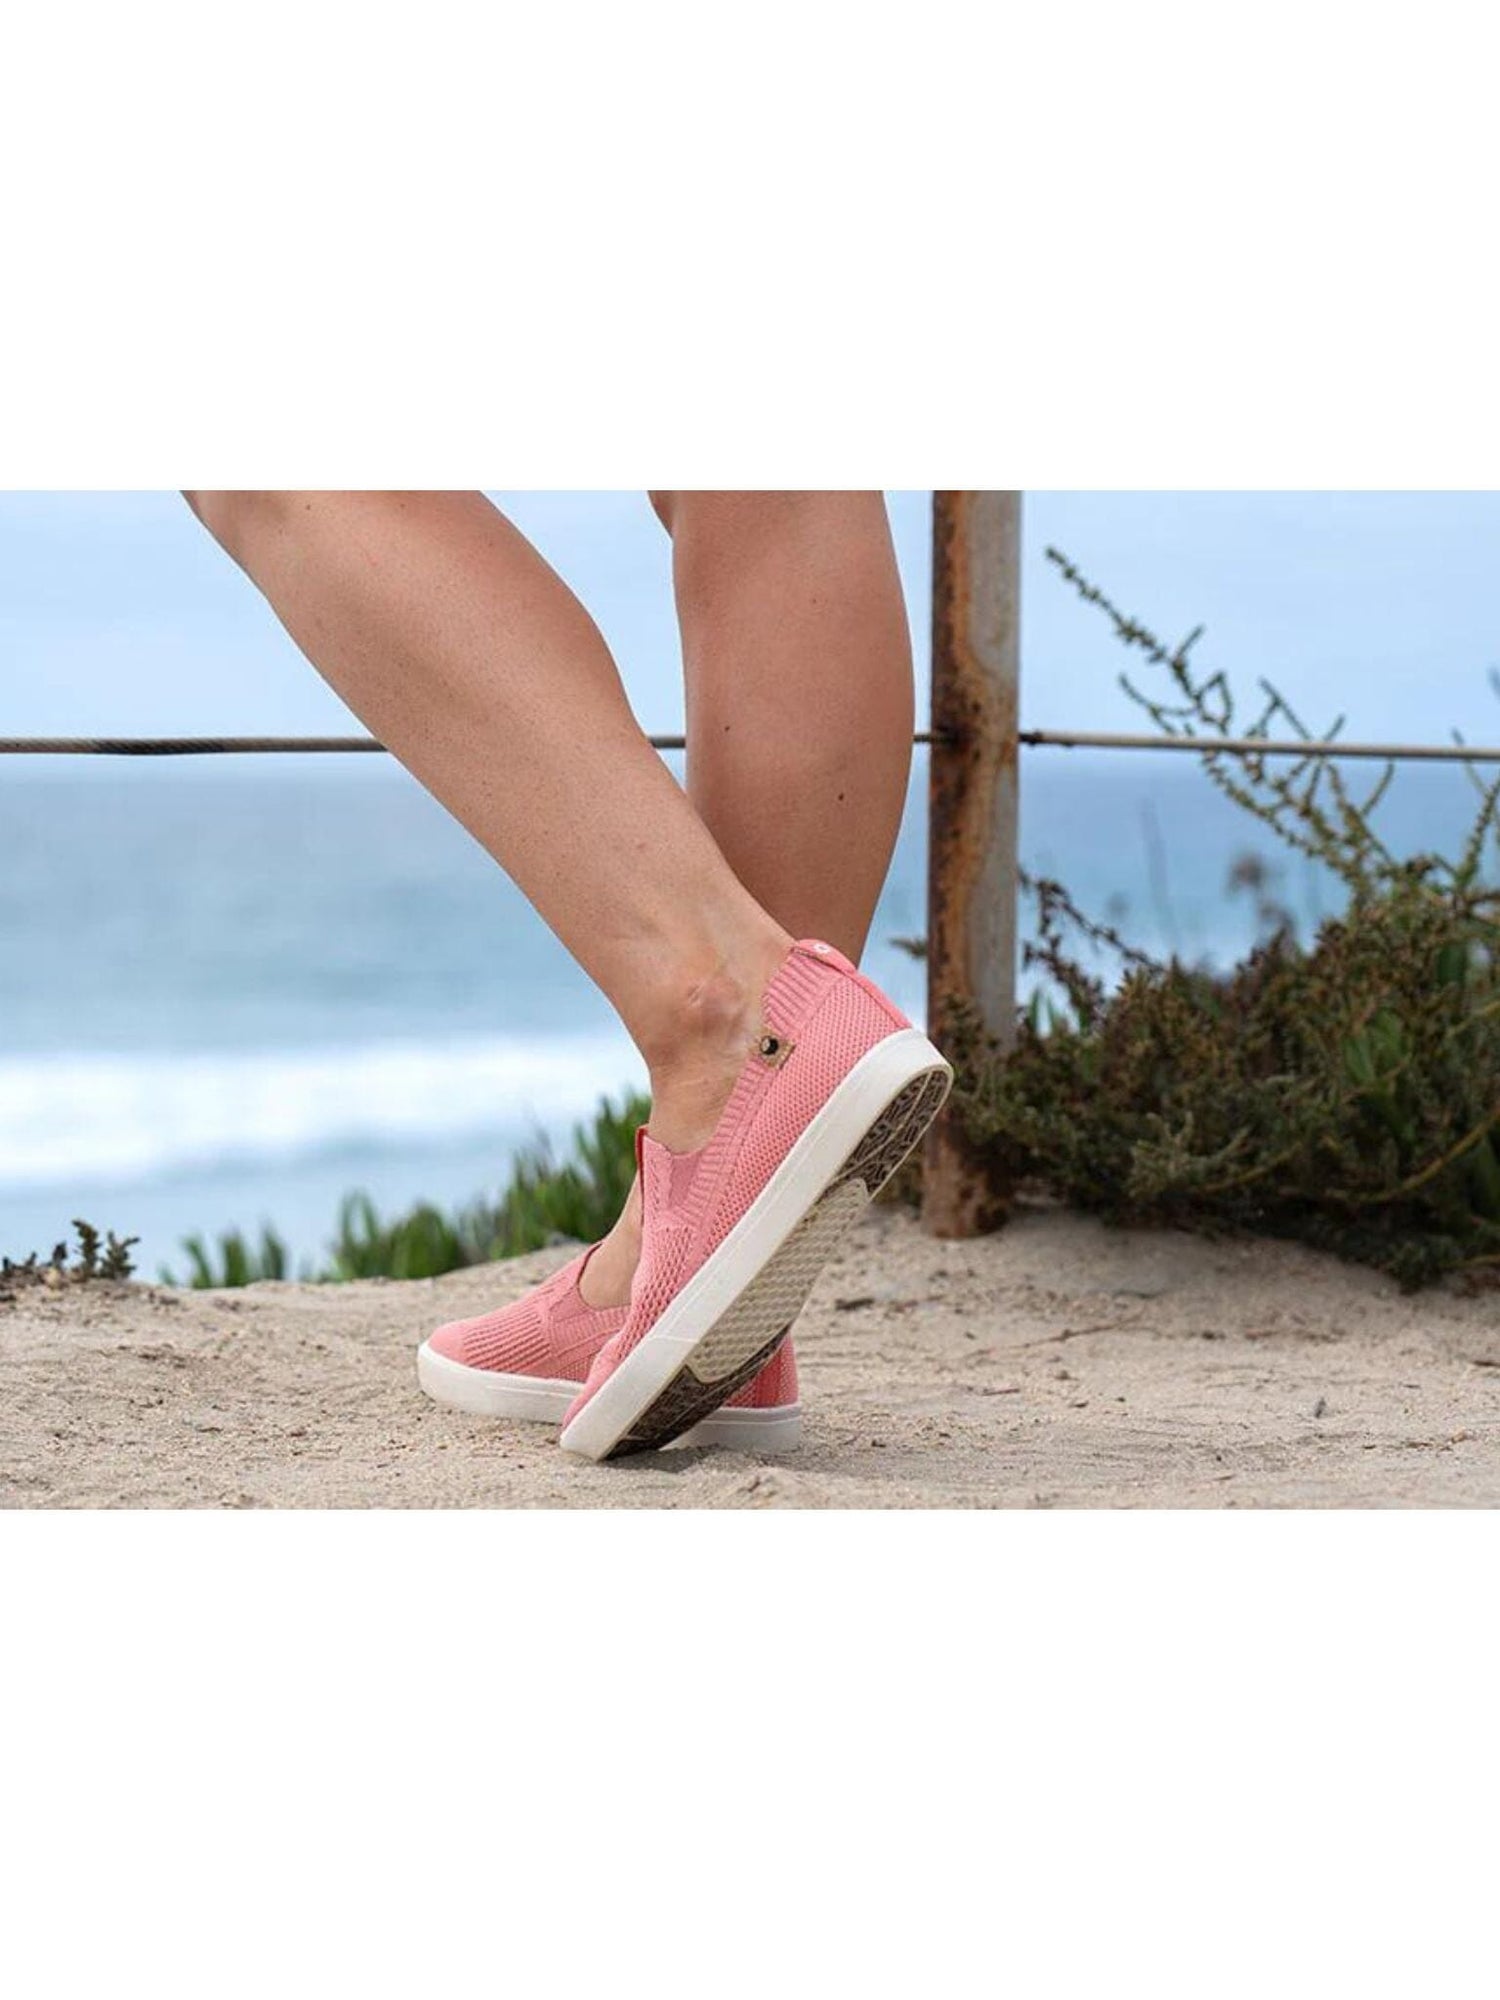 Saola W's Virunga - Recycled Polyester Faded Rose Shoes